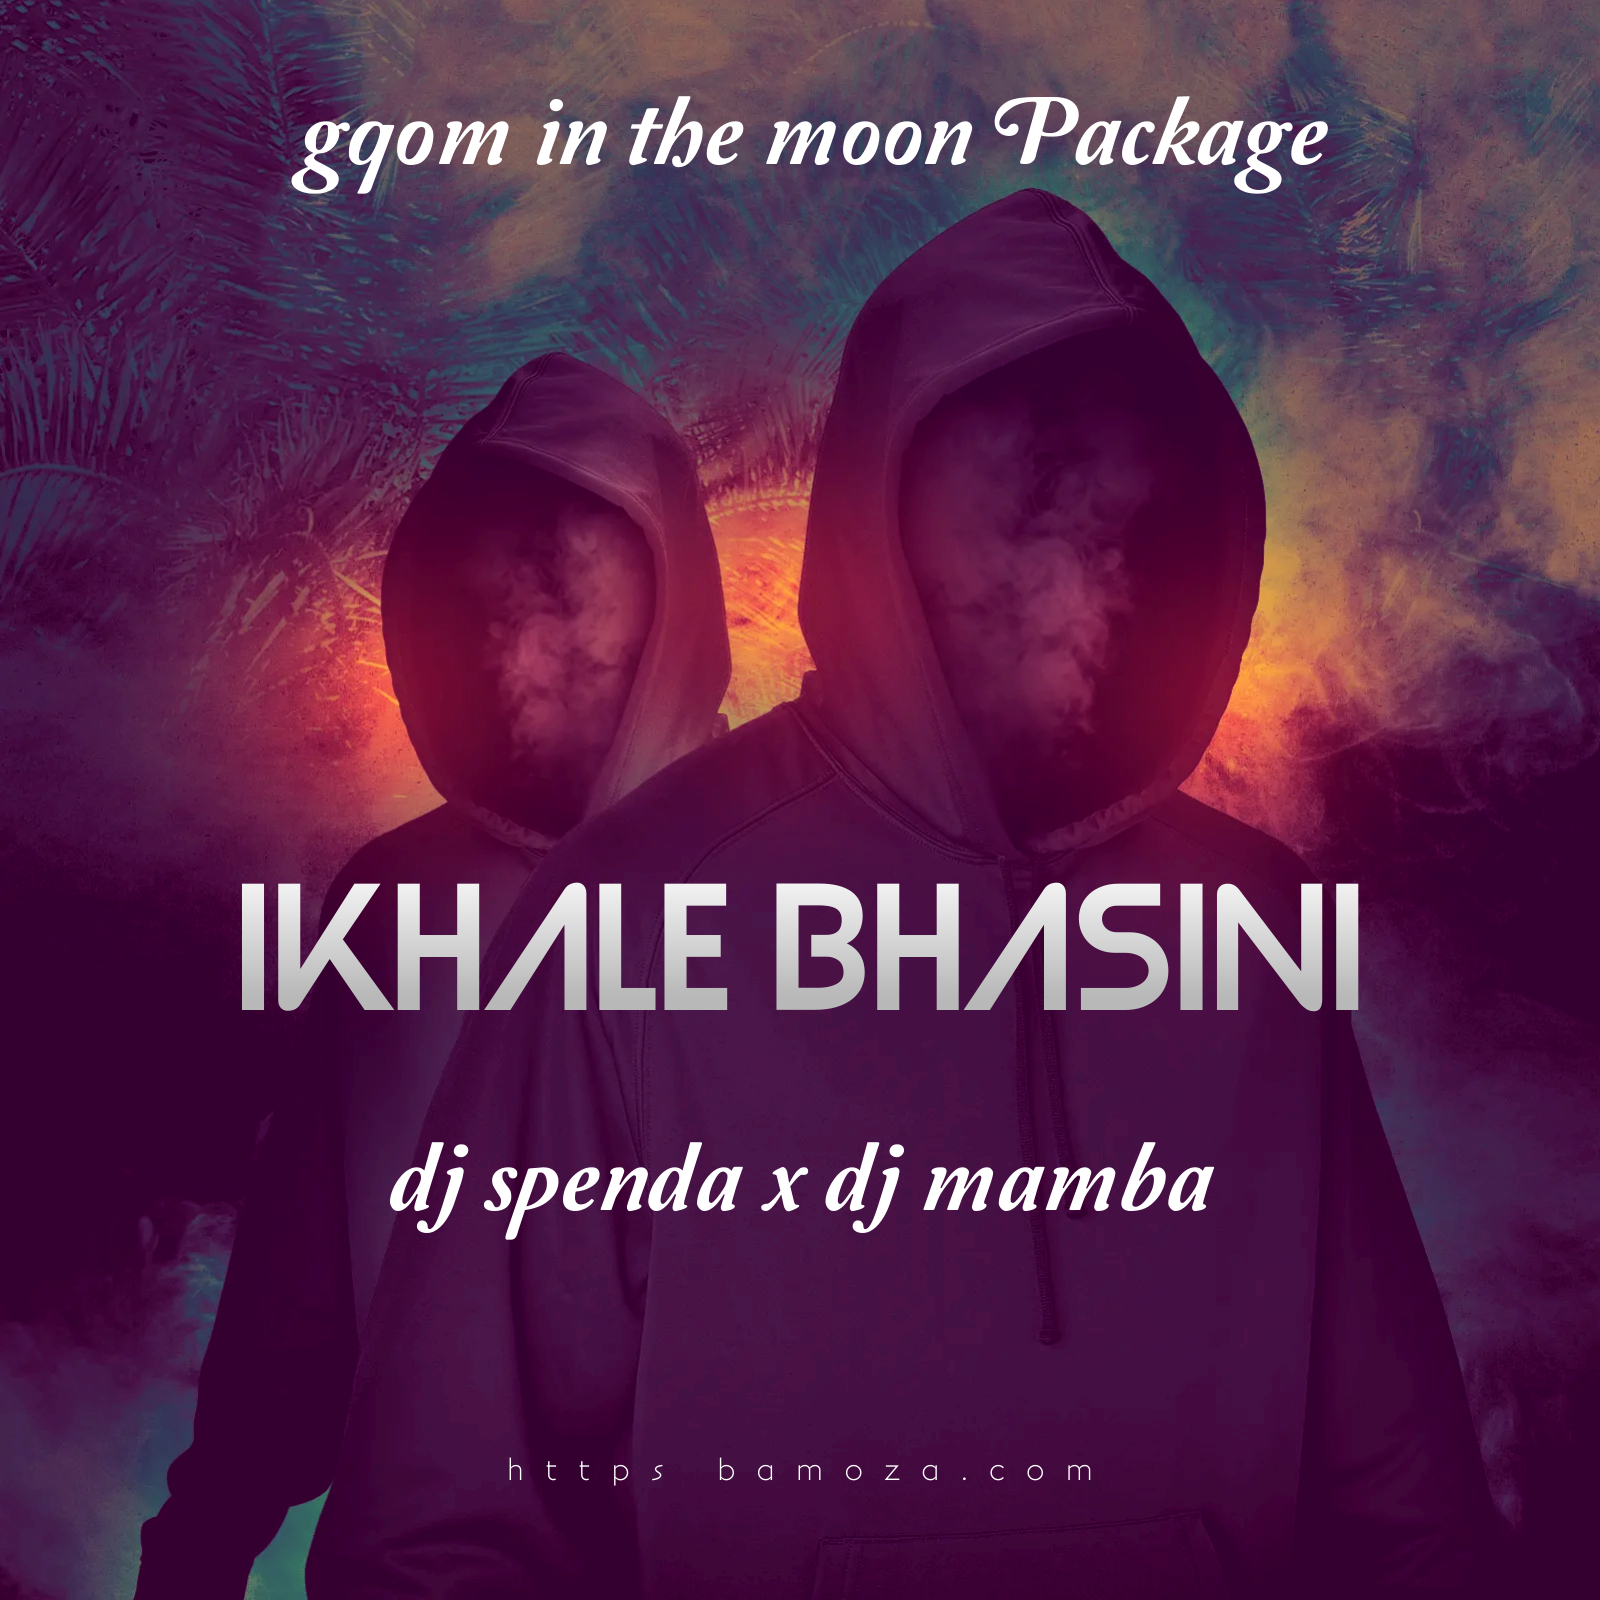 Gqom in the moon package - Spenda CPT x Mamba